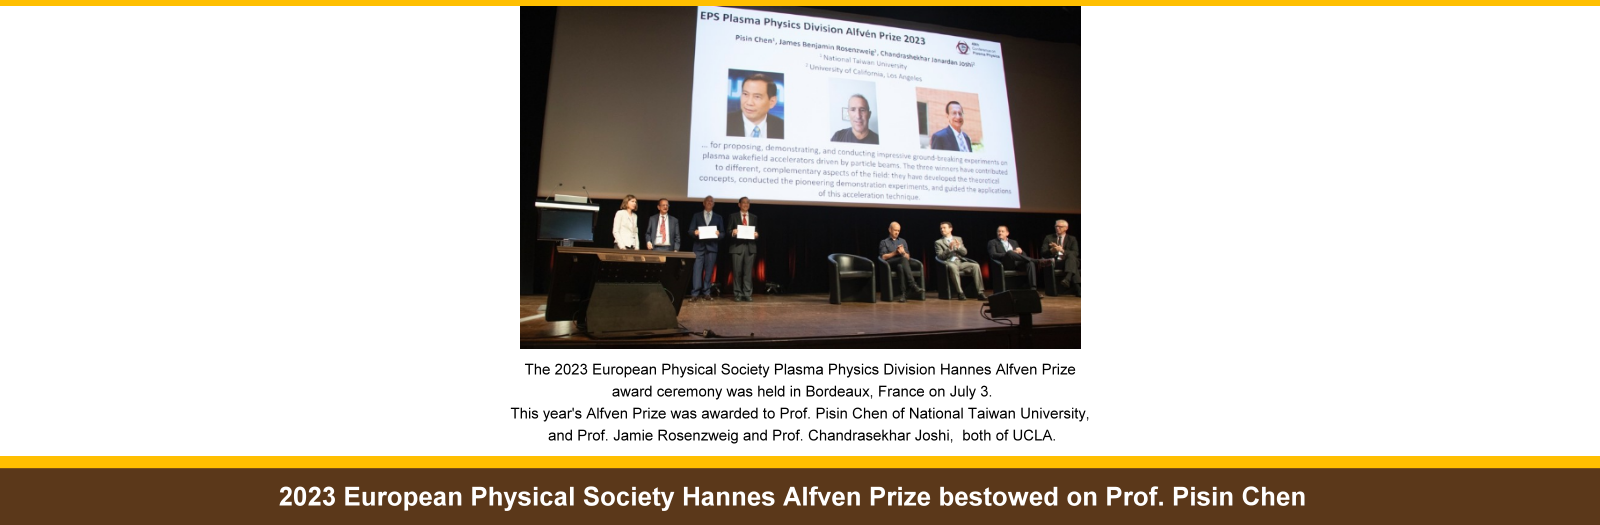 2023 European Physical Society Hannes Alfven Prize bestowed on Prof. Pisin Chen